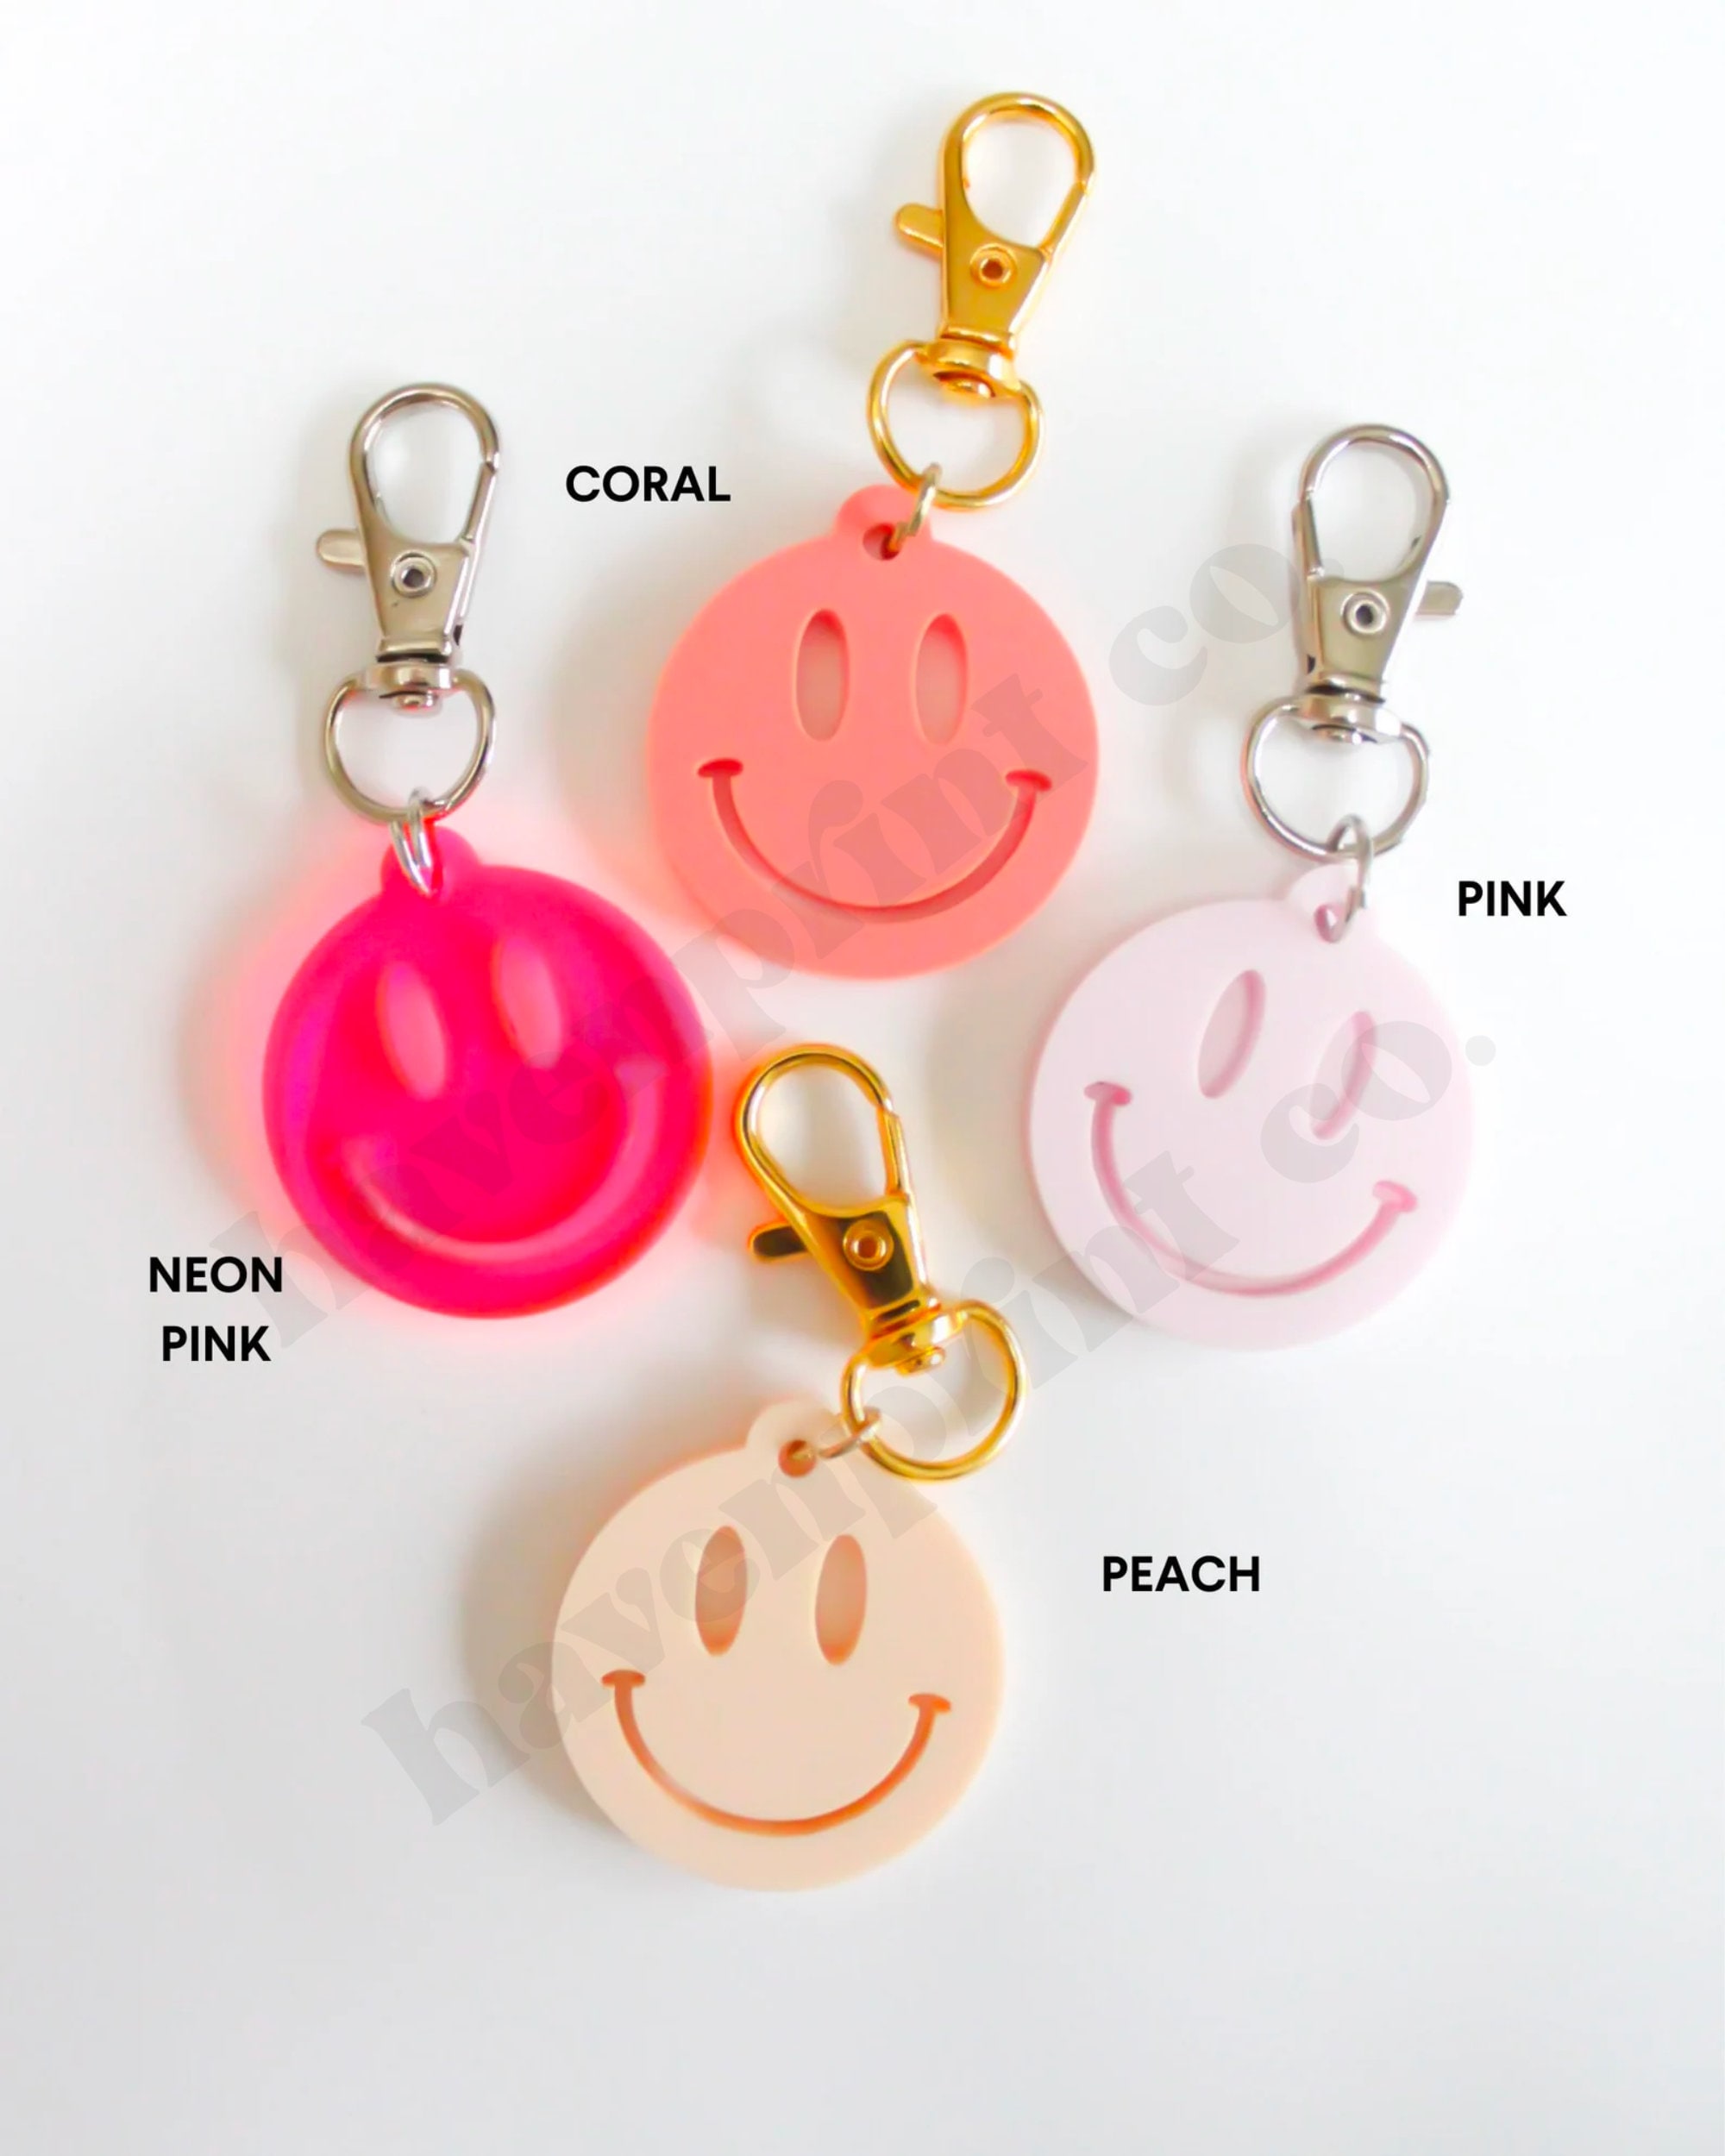 Smiley Face Keychain Wristlet Filled in Smiley Faces / Key Fob 